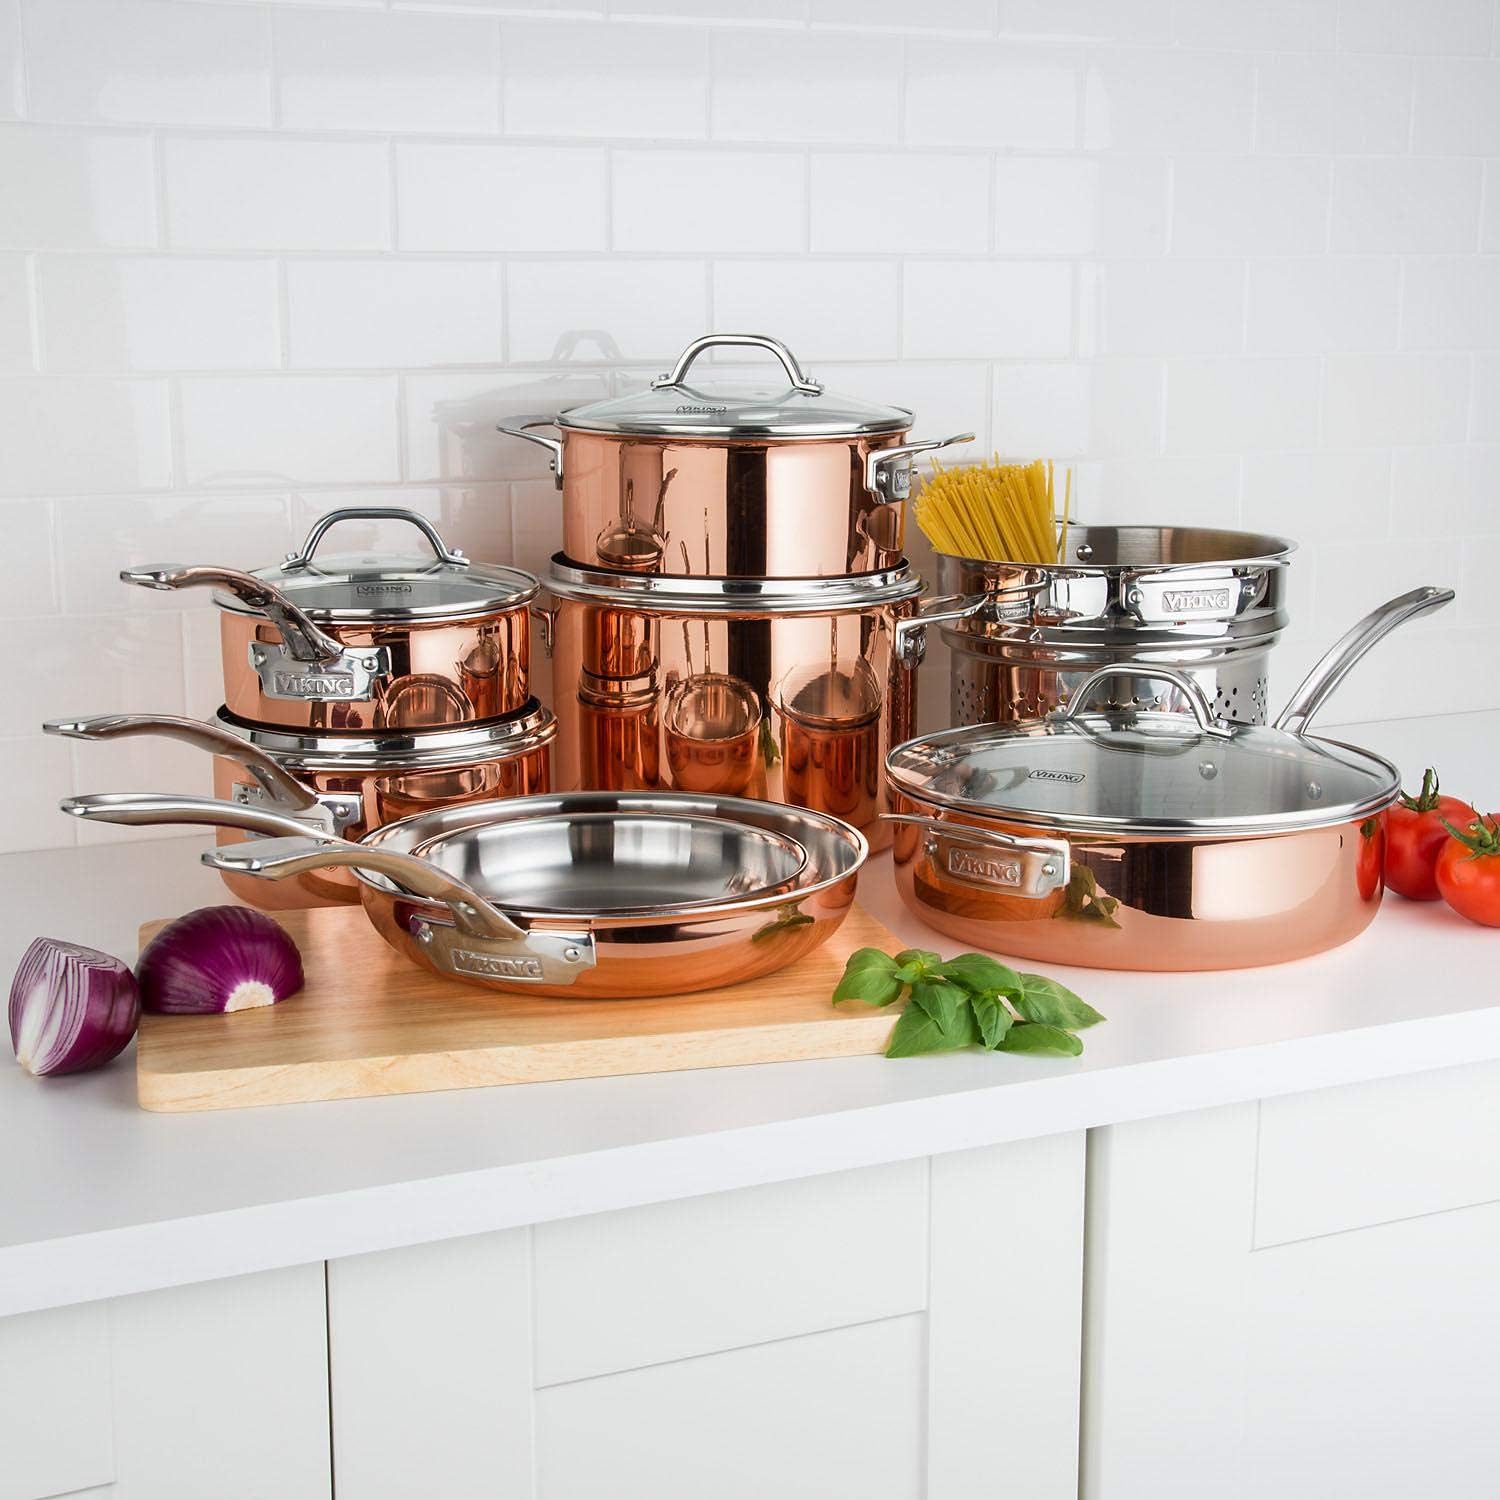 13-Piece Tri-Ply Copper Cookware Set by Viking